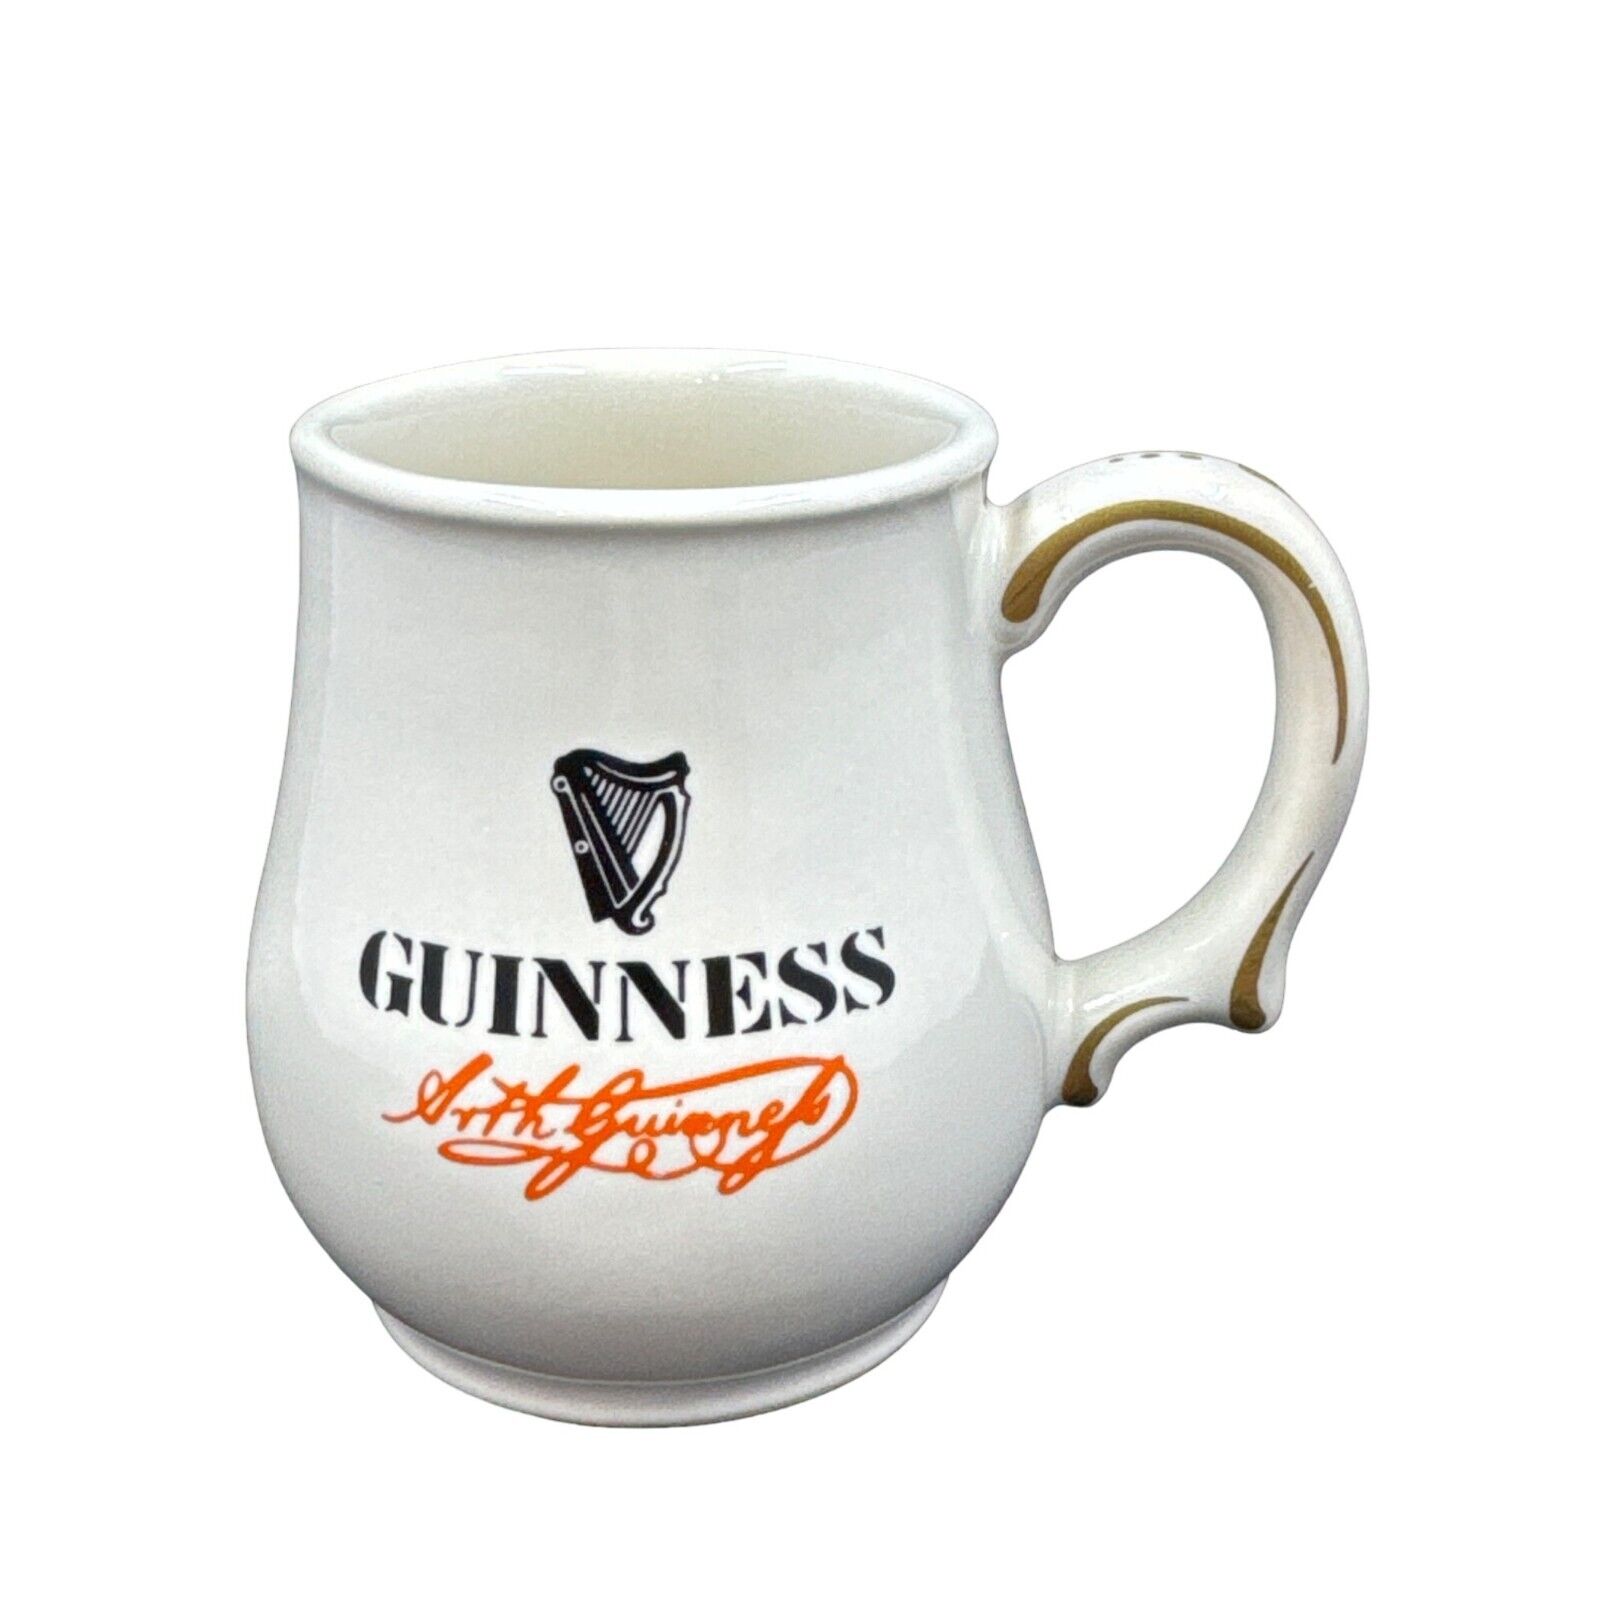 GUINNESS Tankards of the World\'s Great Beers 1981 Franklin Porcelain